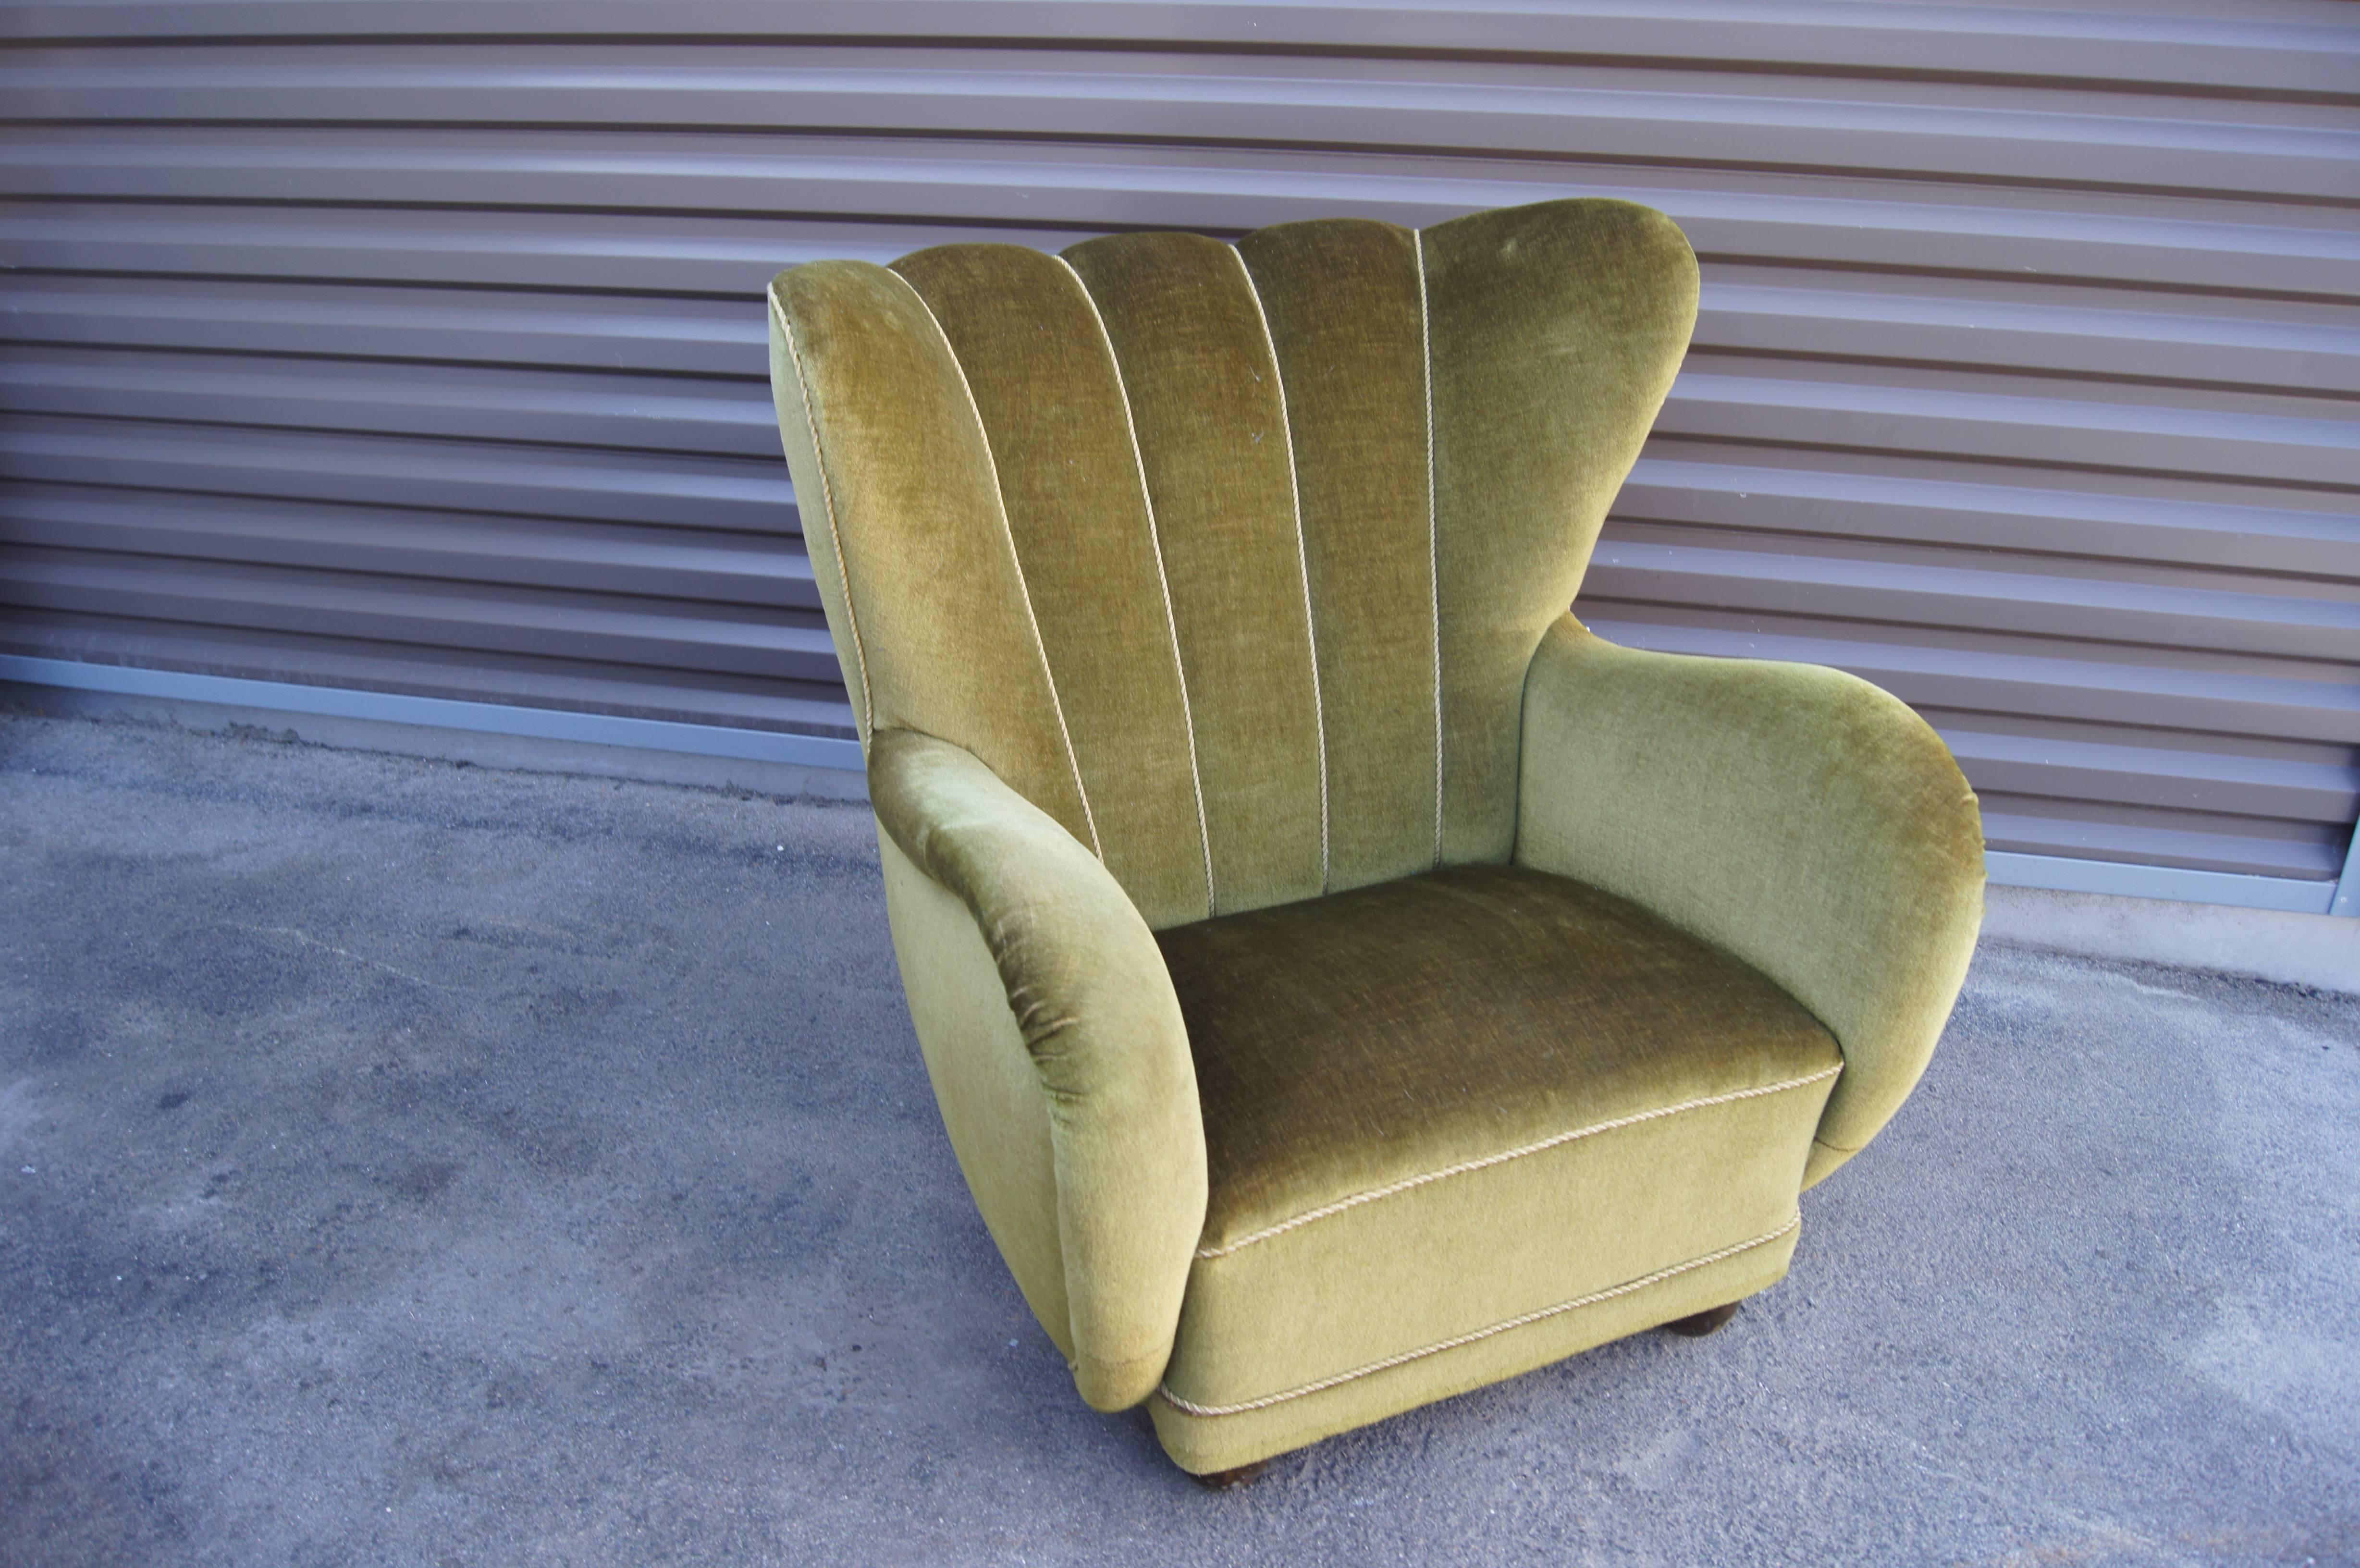 The exuberant curves of this Danish Art Deco club chair immediately catch the eye. Set on block feet typical of the period and with a deeply channeled back, it is beautifully upholstered in a lustrous moss green mohair.